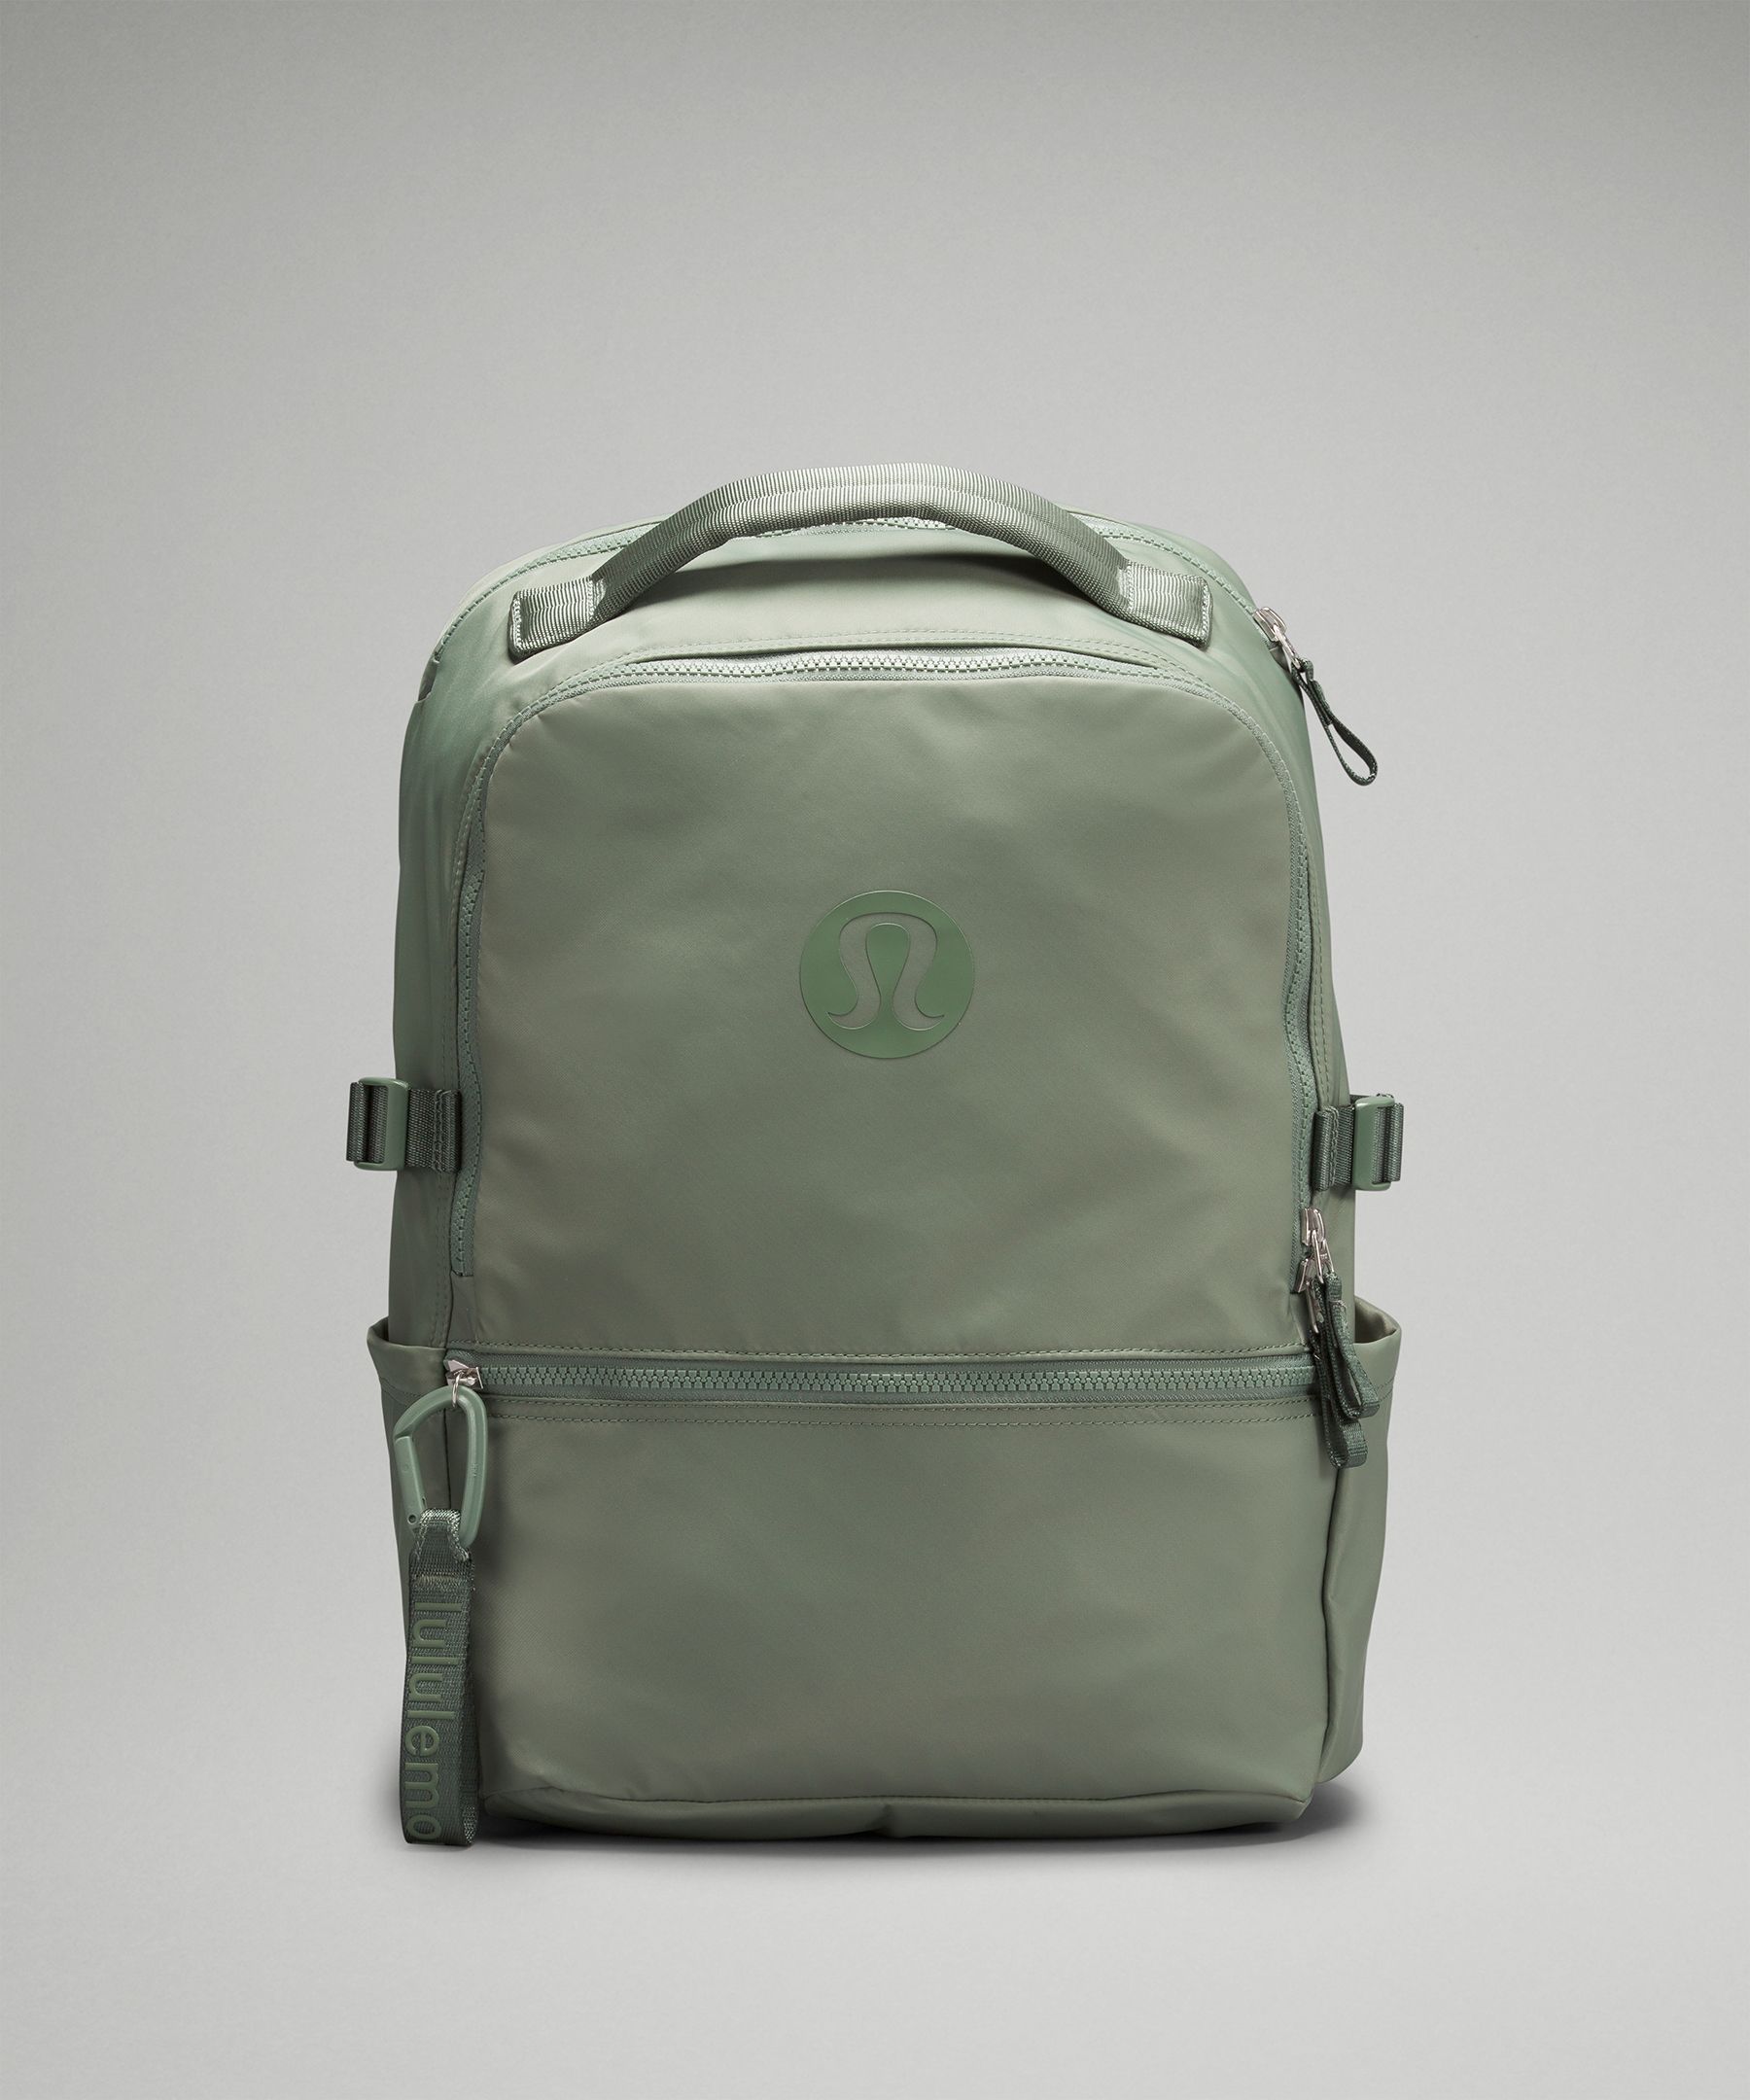 Lululemon Backpack With Laptop Compartment - New Crew 22l